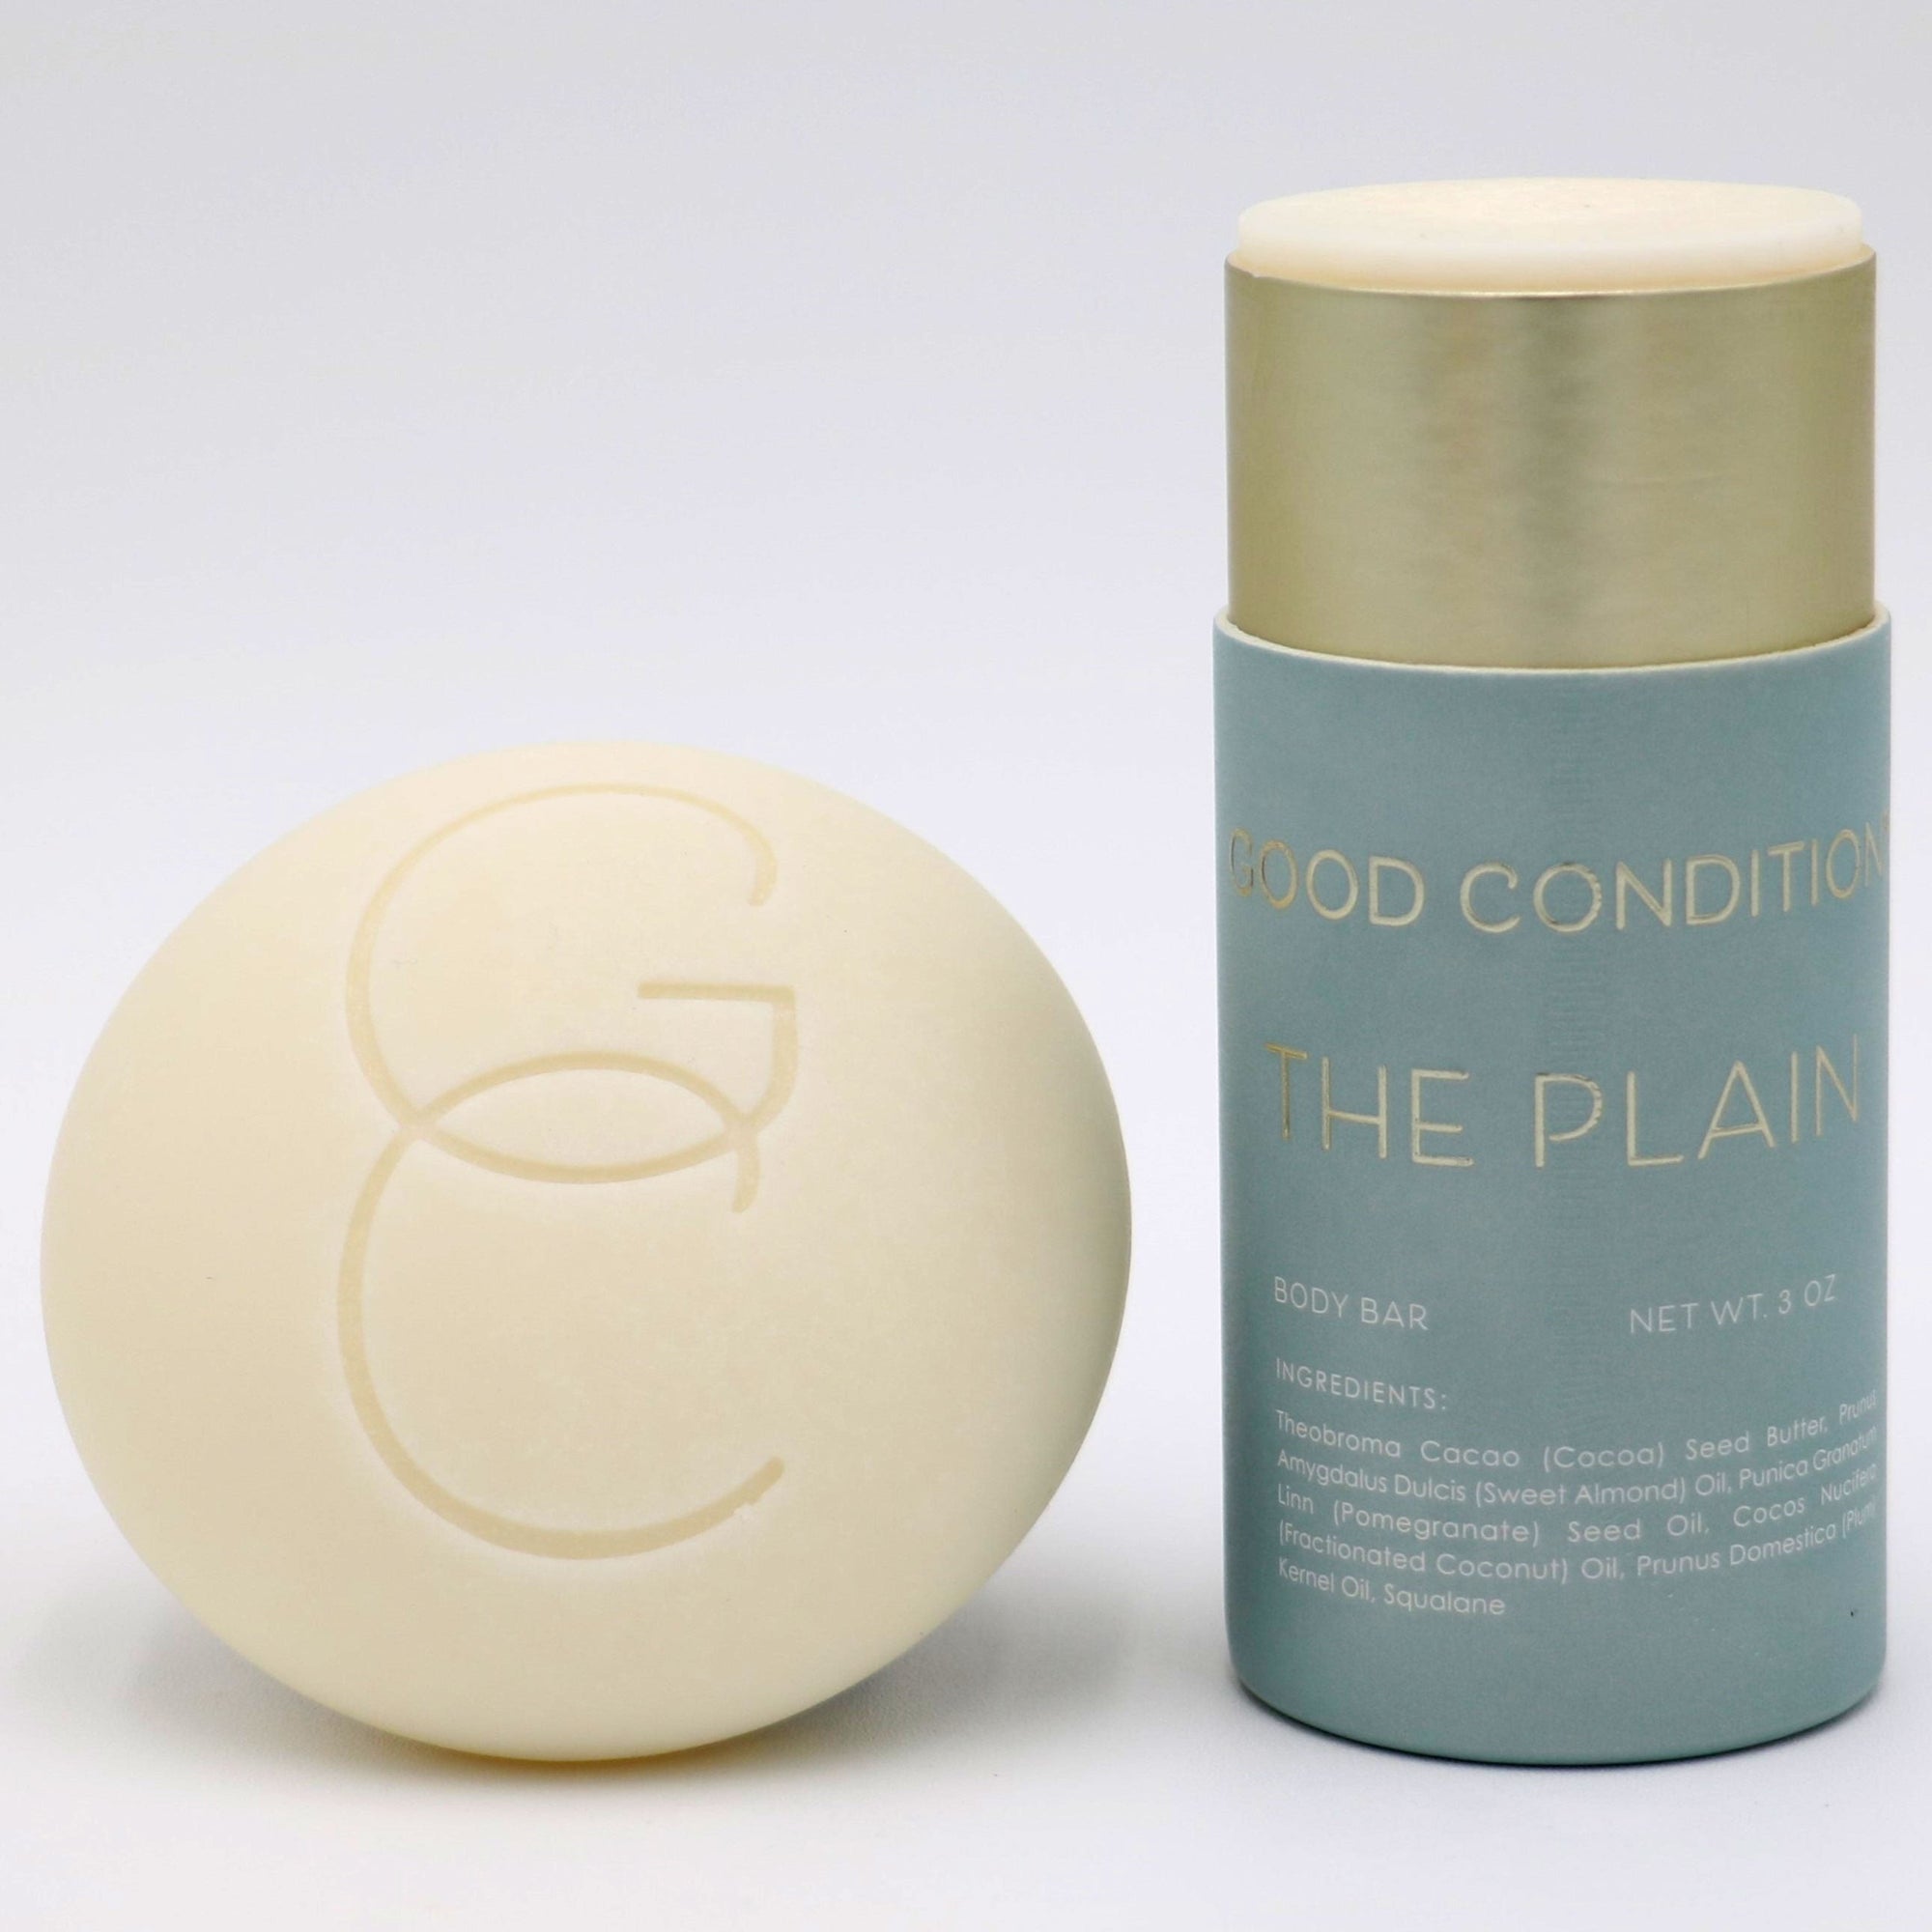 Good Condition The Plain organic cocoa butter body moisturizer tube. Made with sweet almond oil, pomegranate seed oil, plum kernel oil and squalane. Plastic free and hand made in small batches.